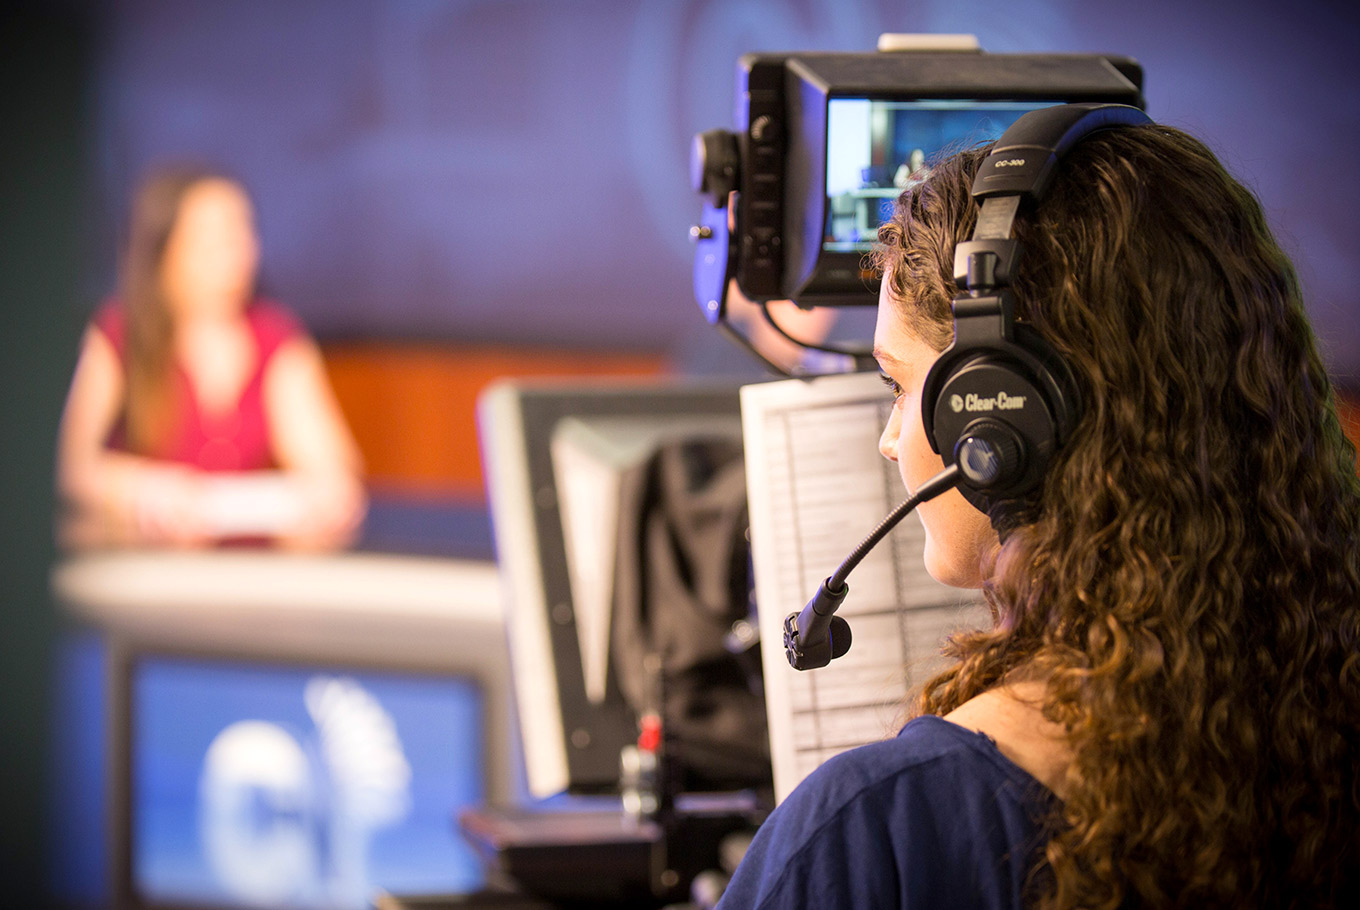 Female student works at a TV station with a headset on.